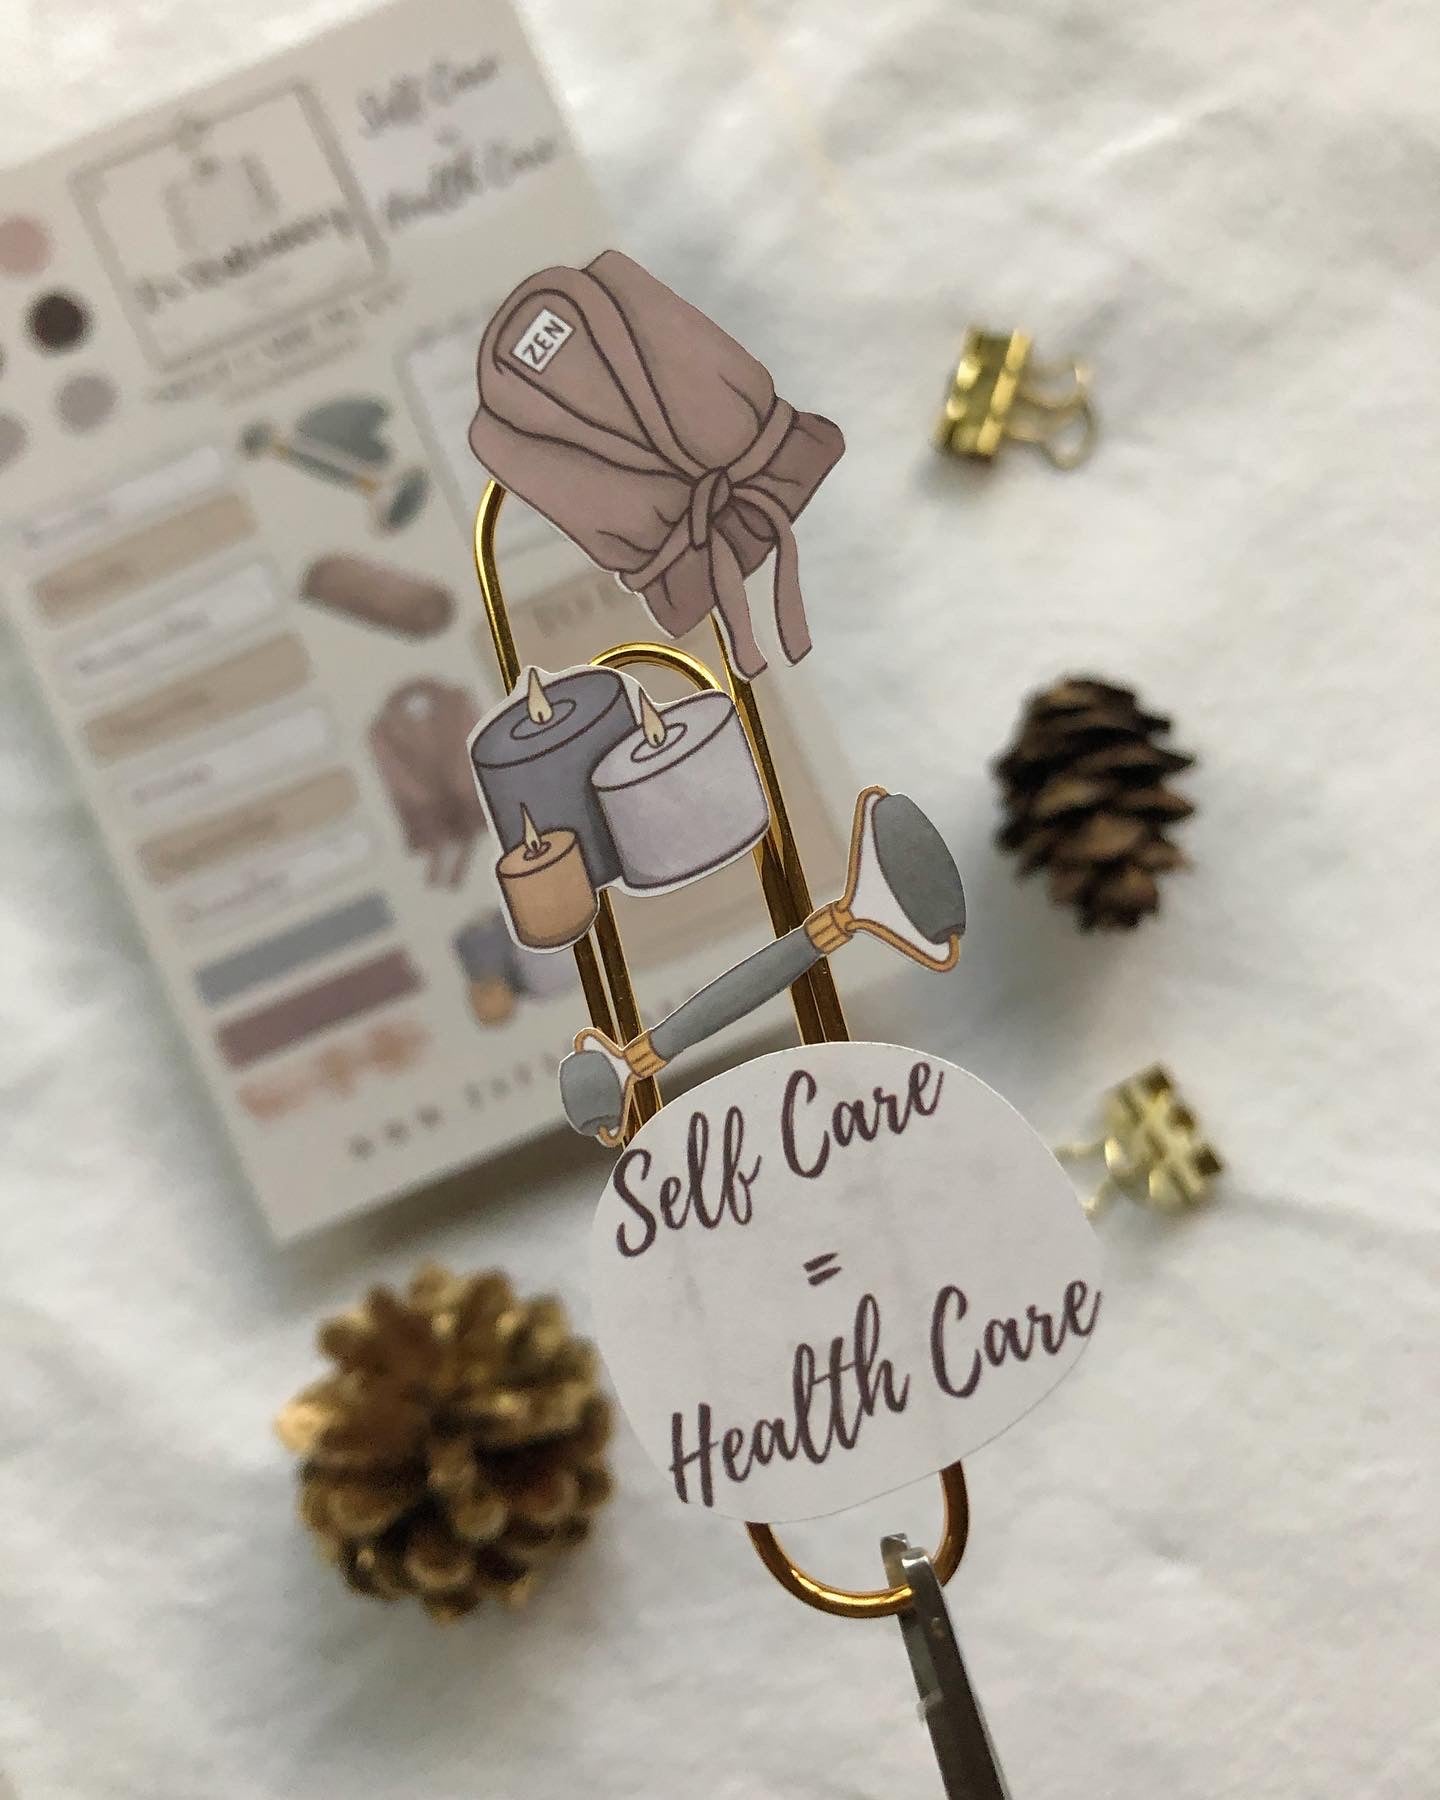 "Self Care Plan" Planner Stickers